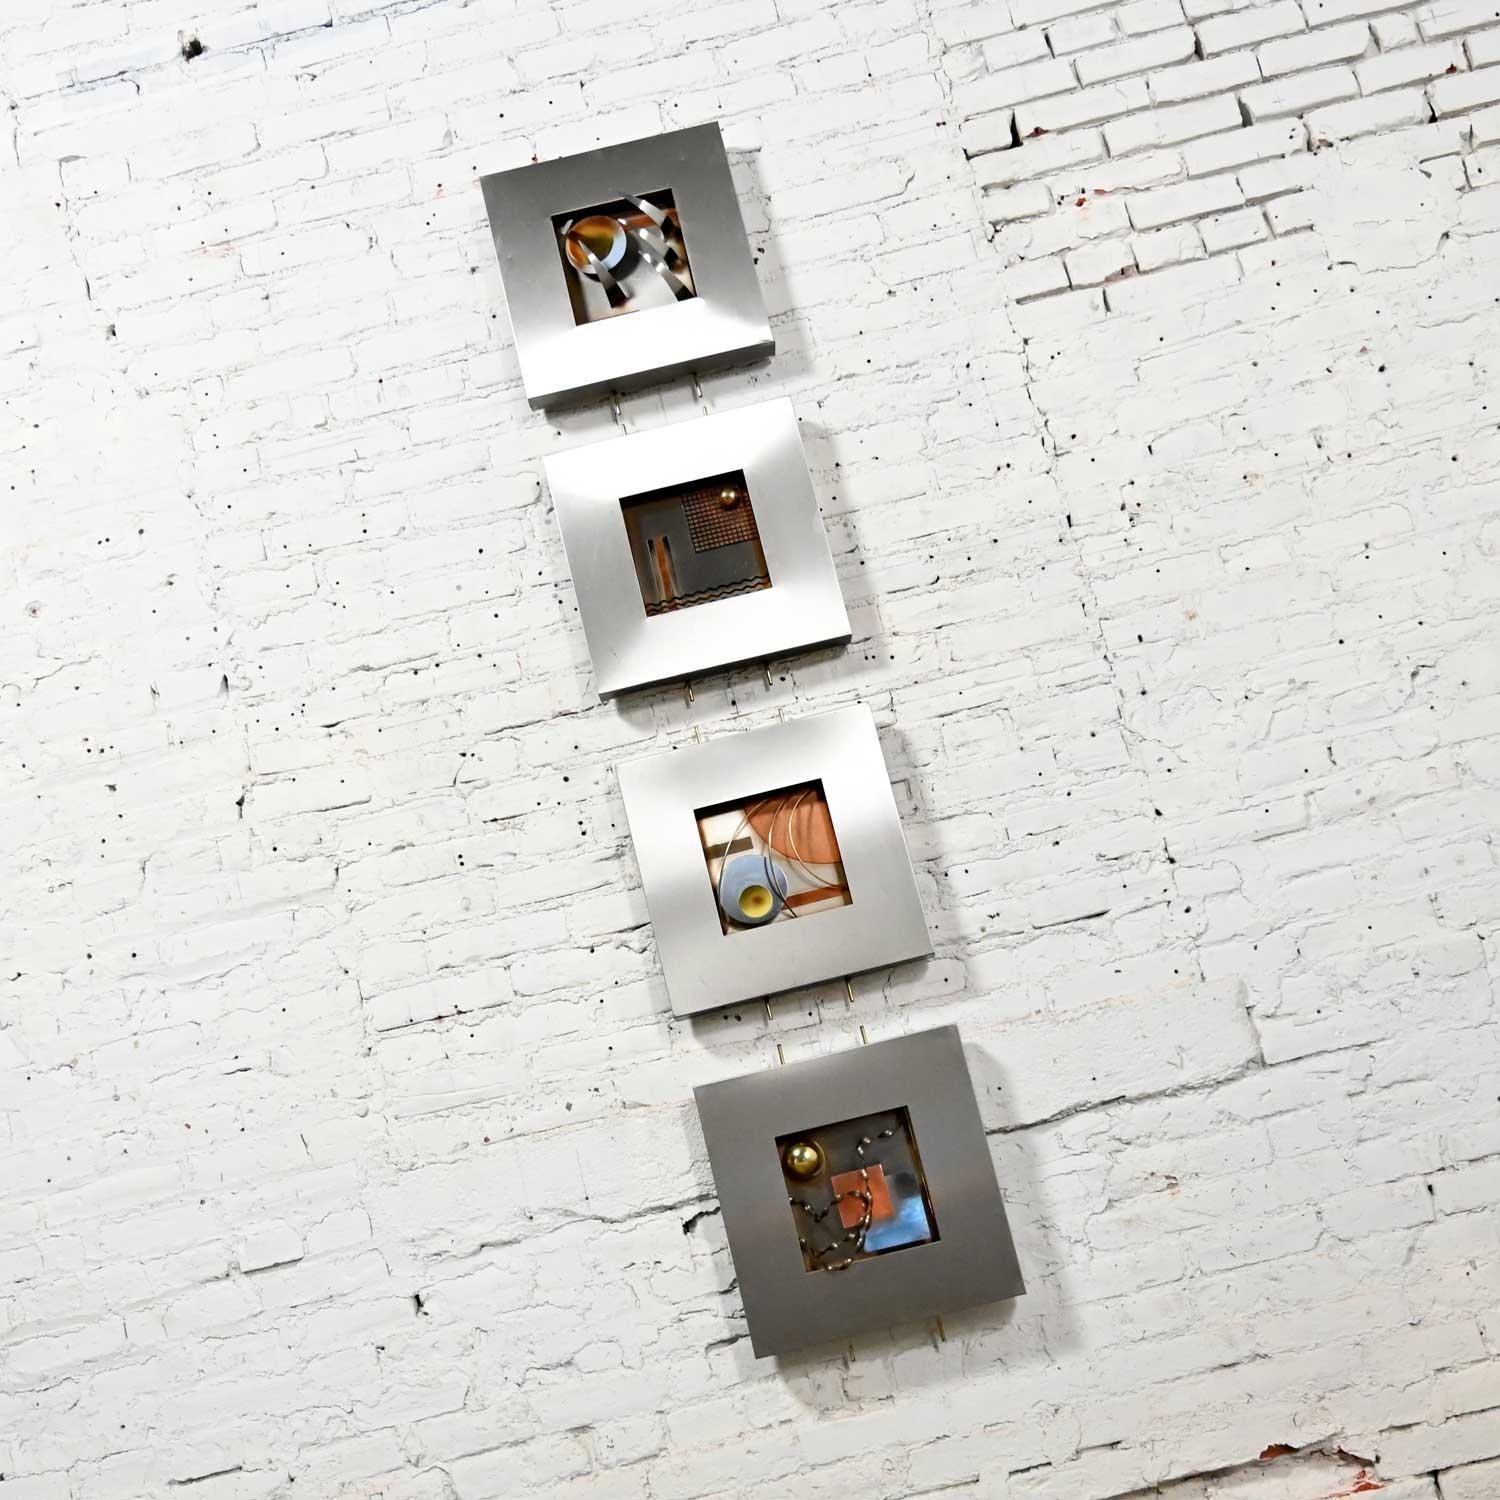 American Modern Geometric Mixed Metal Dimensional Wall Sculptures by C Jere Series of 4 For Sale